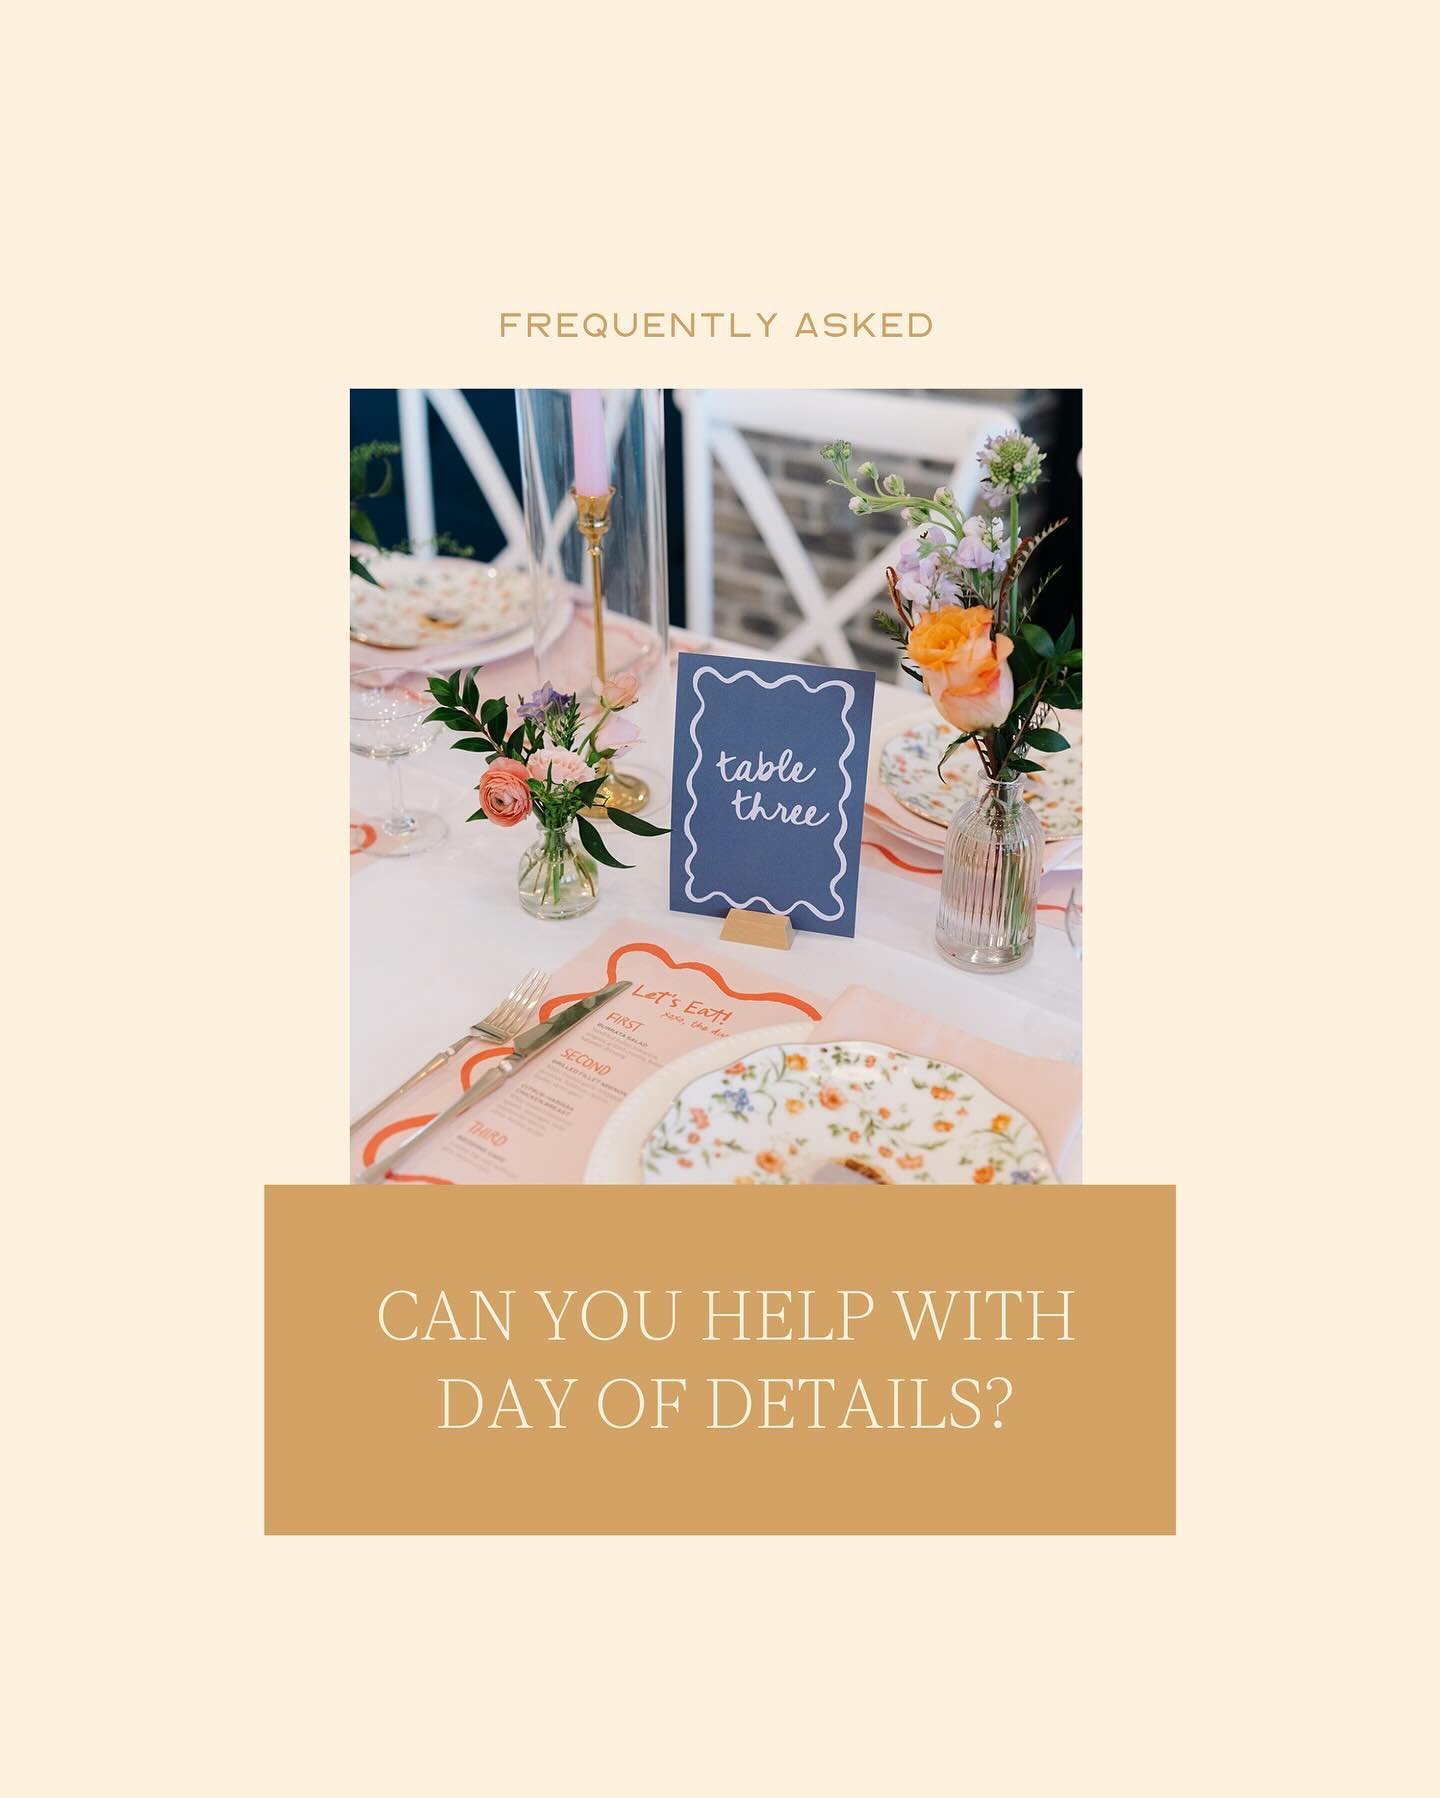 I 🤍 helping make your guest experience one they remember with clear and cohesive day of details &ndash; design complimentary of your invite suite, always.

#FAQ #kcweddingvendor #kcdayofdetails #kcweddingstationer #weddingdayofdetails #weddingstatio